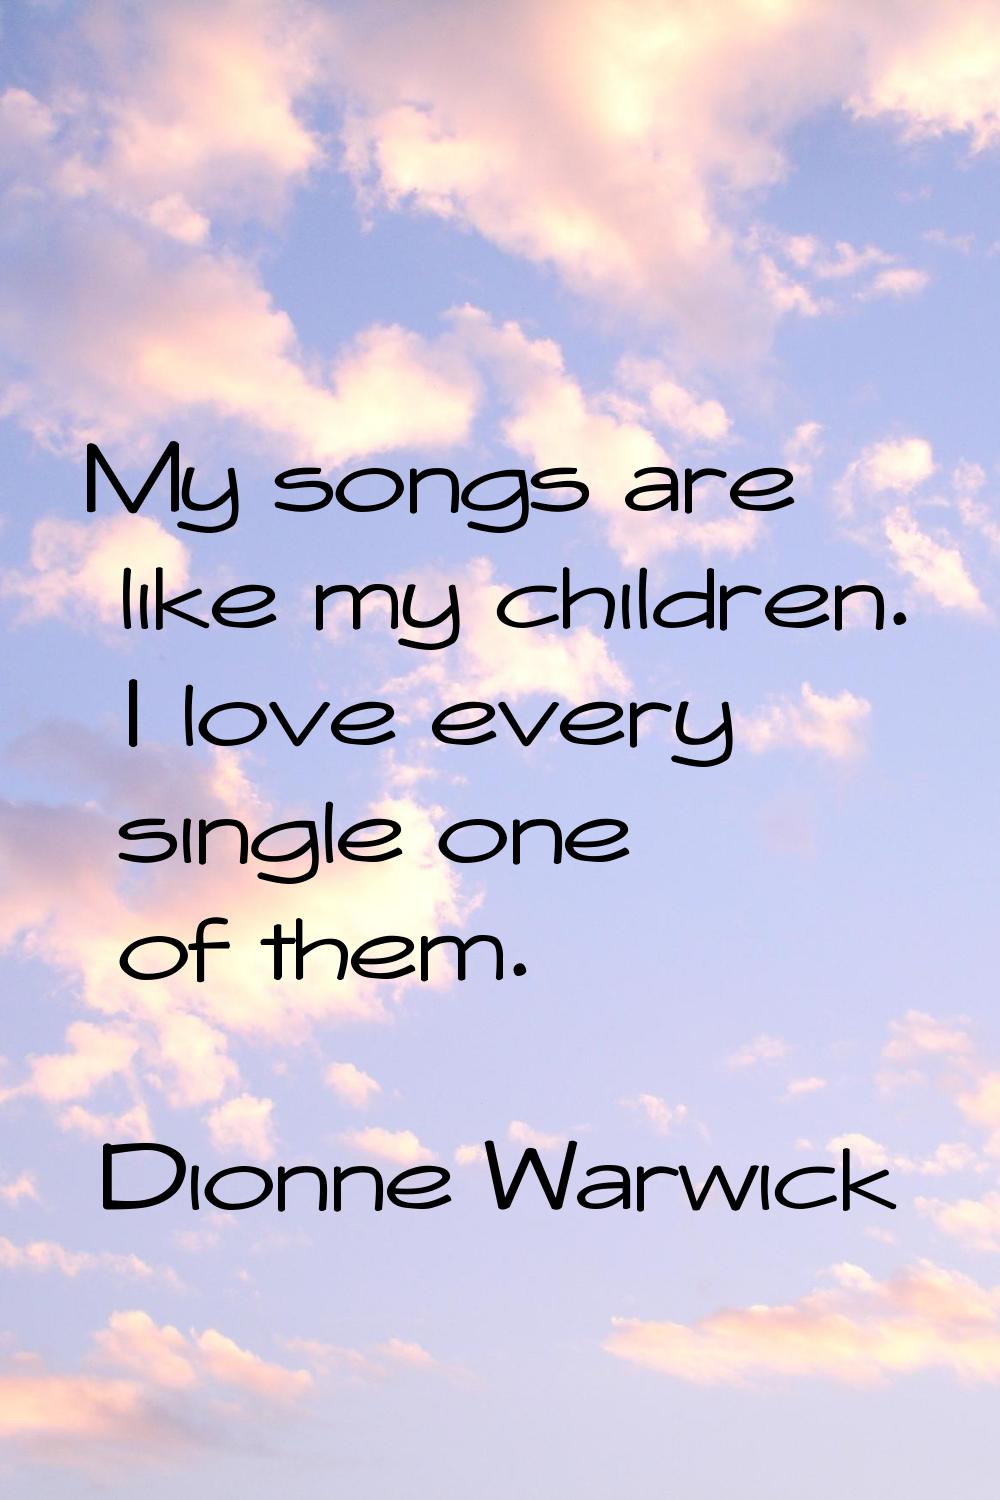 My songs are like my children. I love every single one of them.